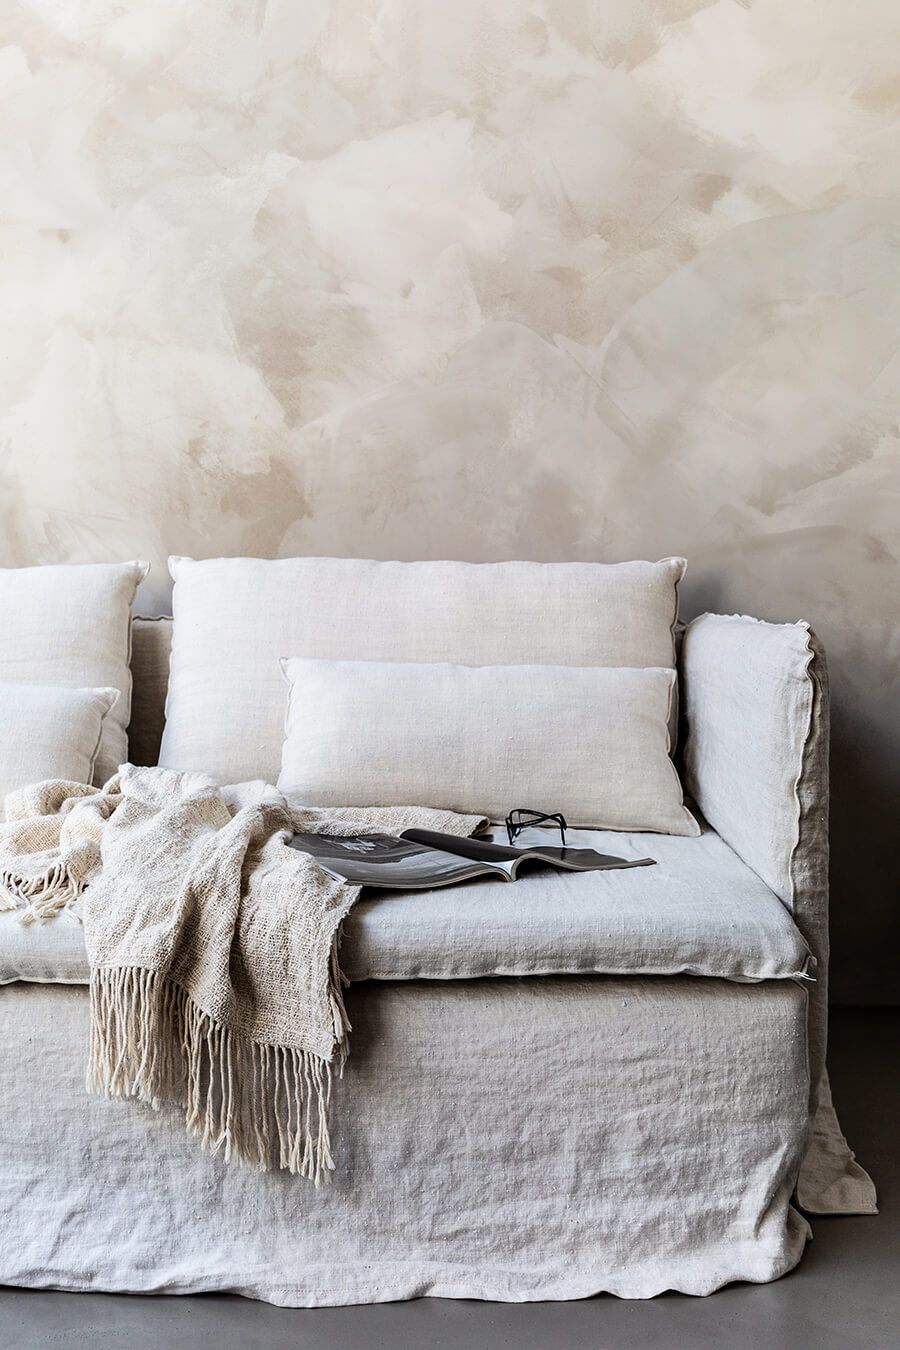 The Luxurious Comfort of Linen Sofas: Why
They’re Worth the Investment